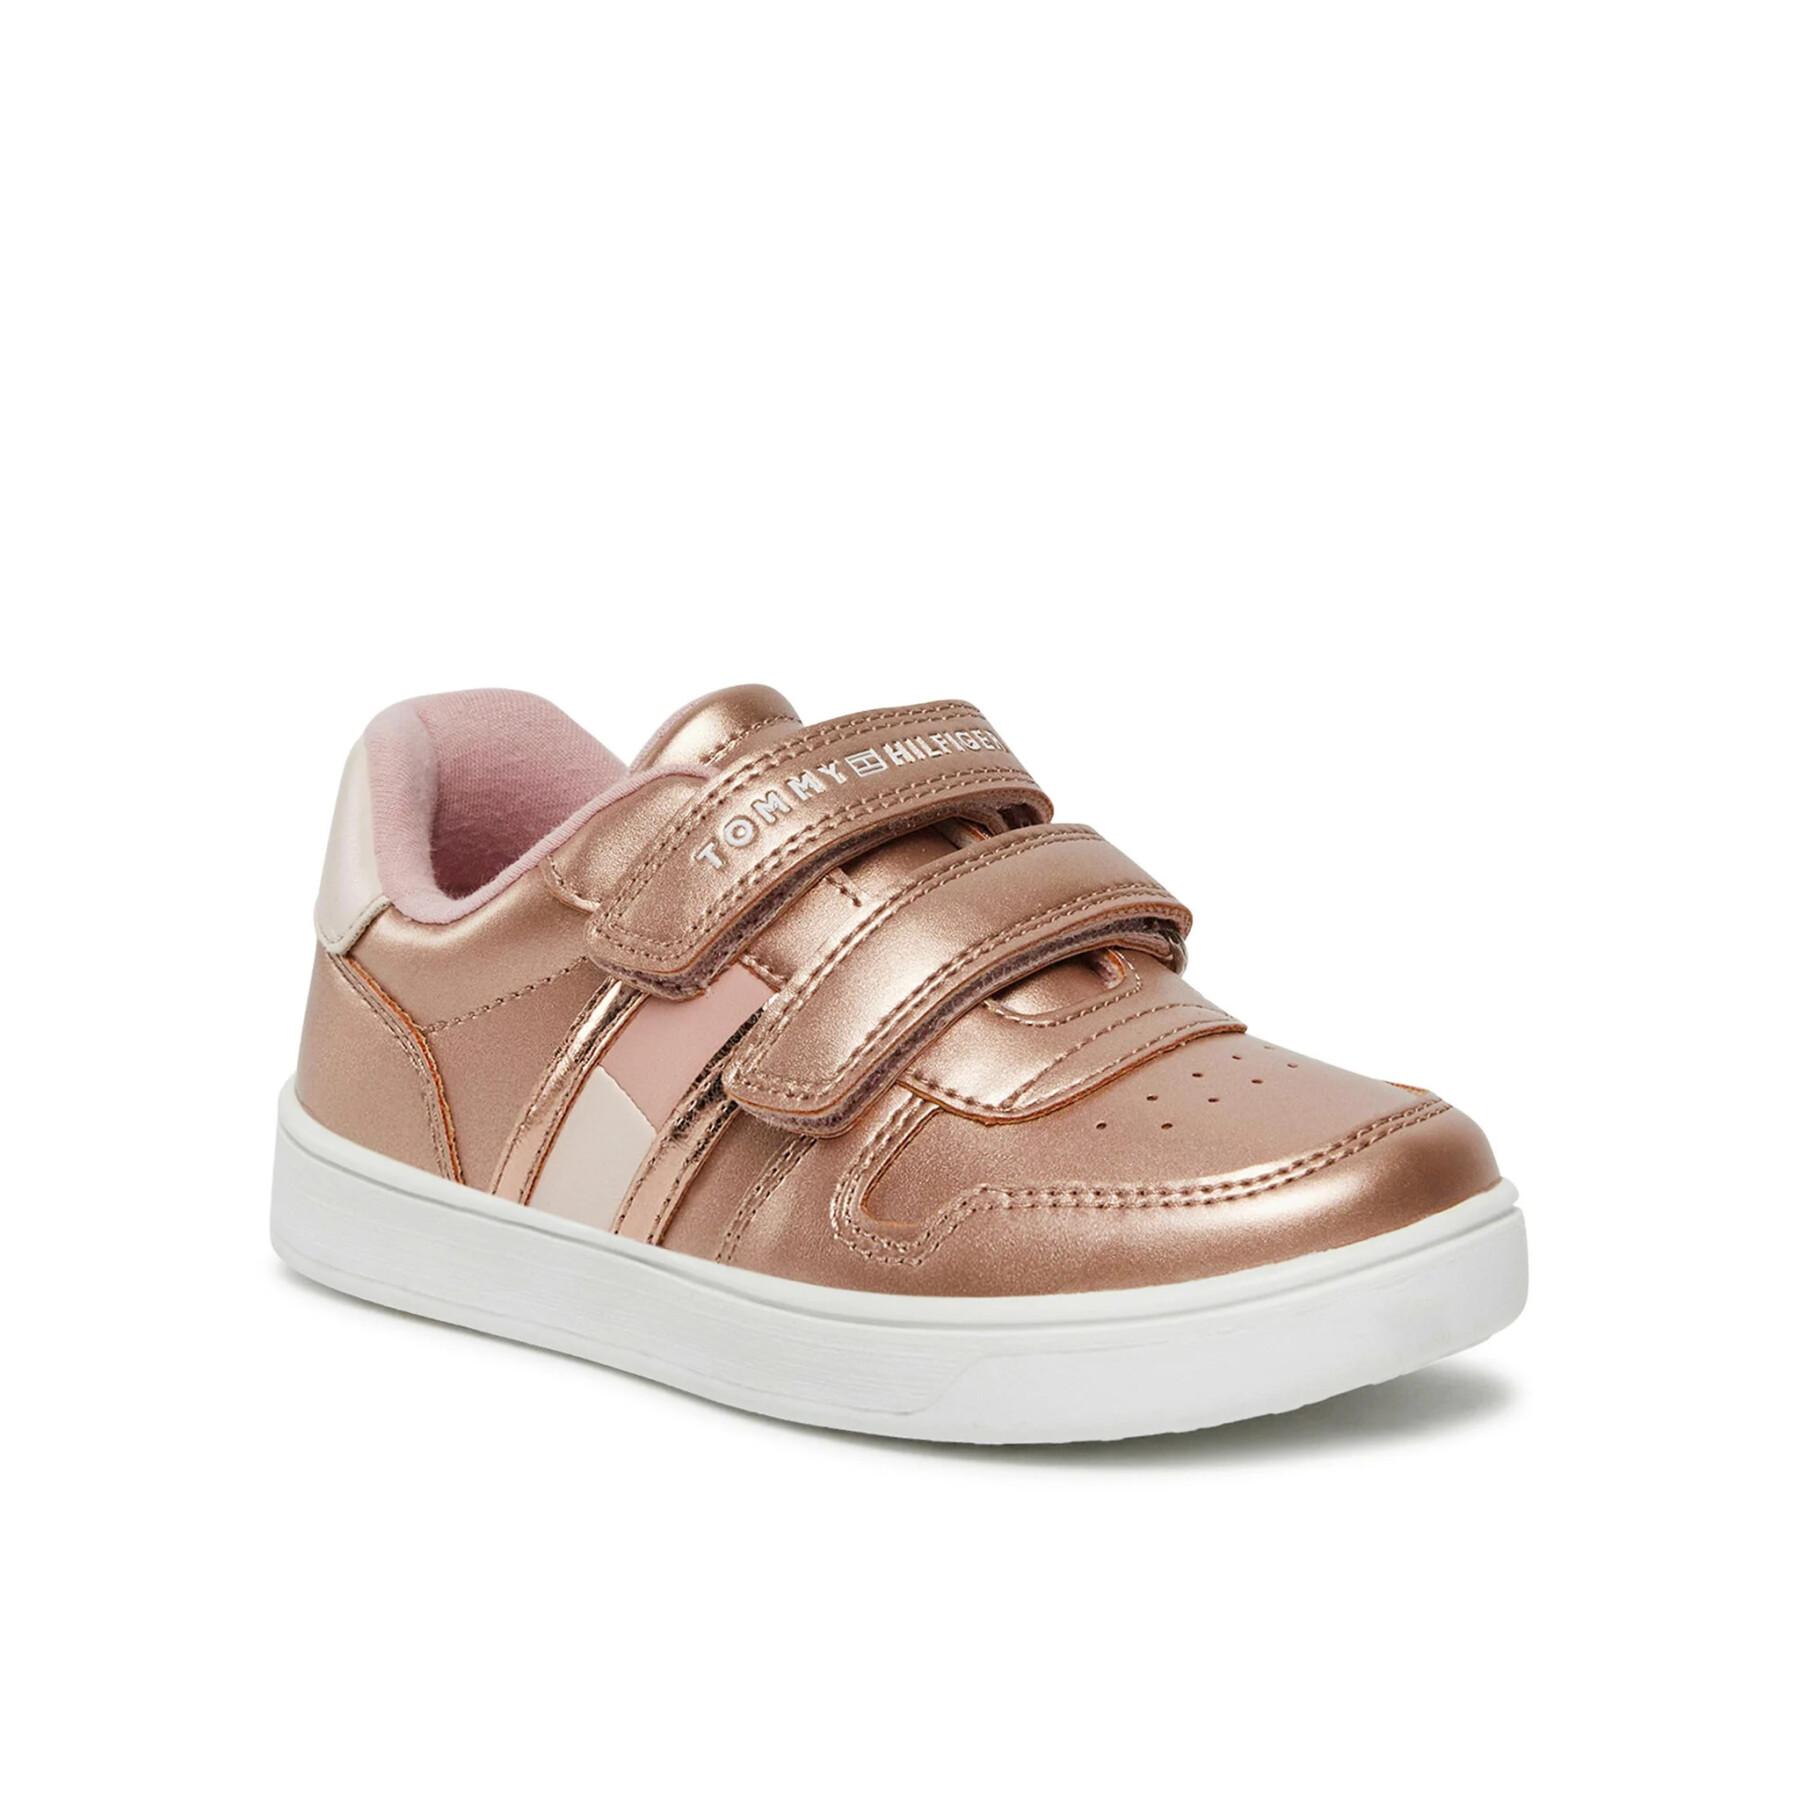 Velcro flag low cut baby sneakers Tommy Hilfiger